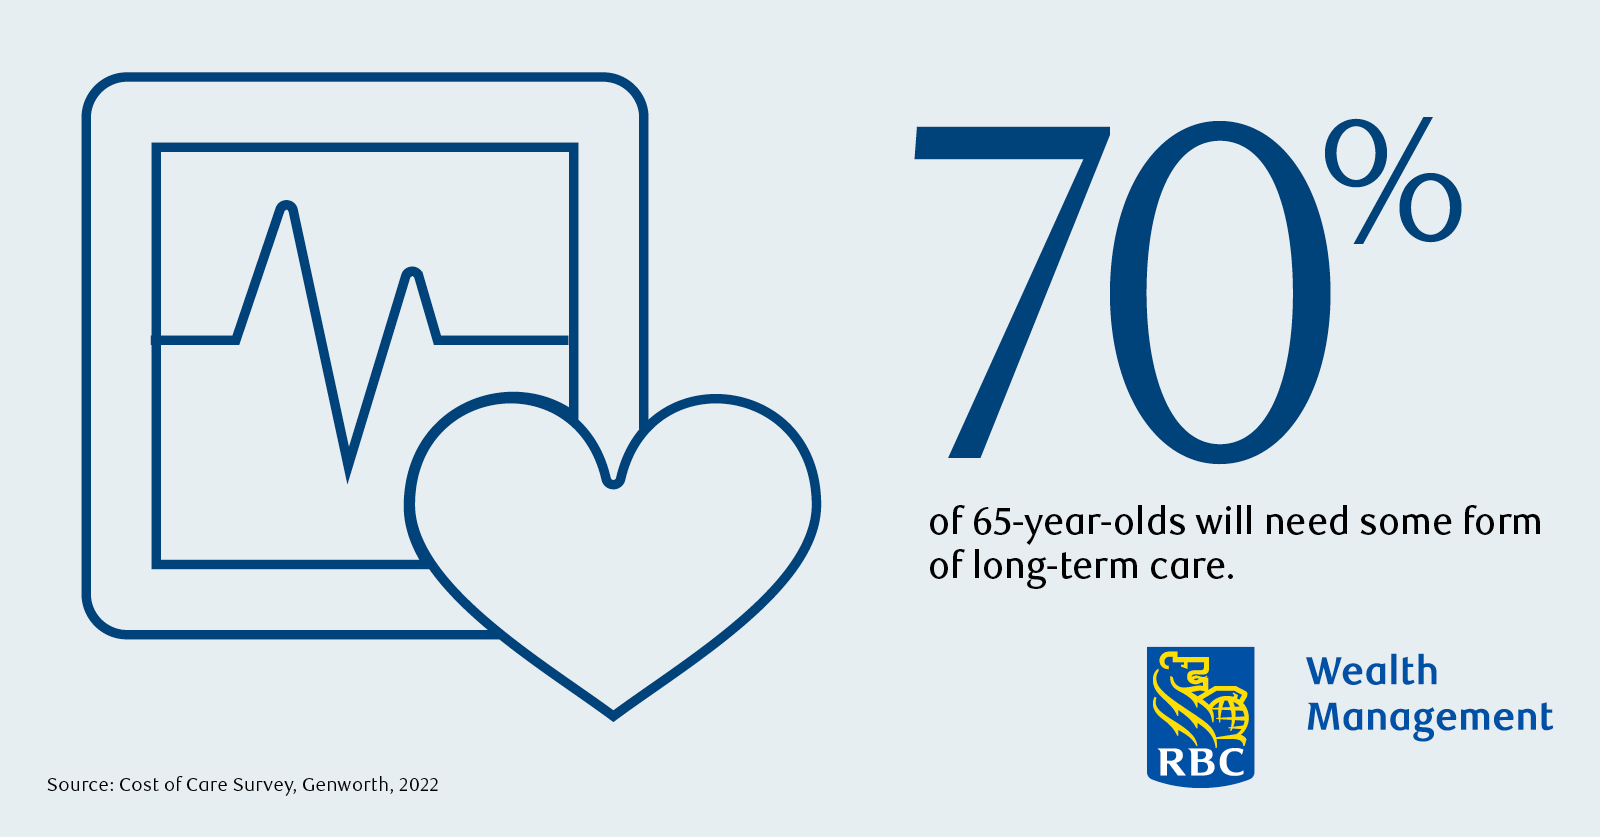 infographic - 70% of 65-year-olds will need some form of long-term care